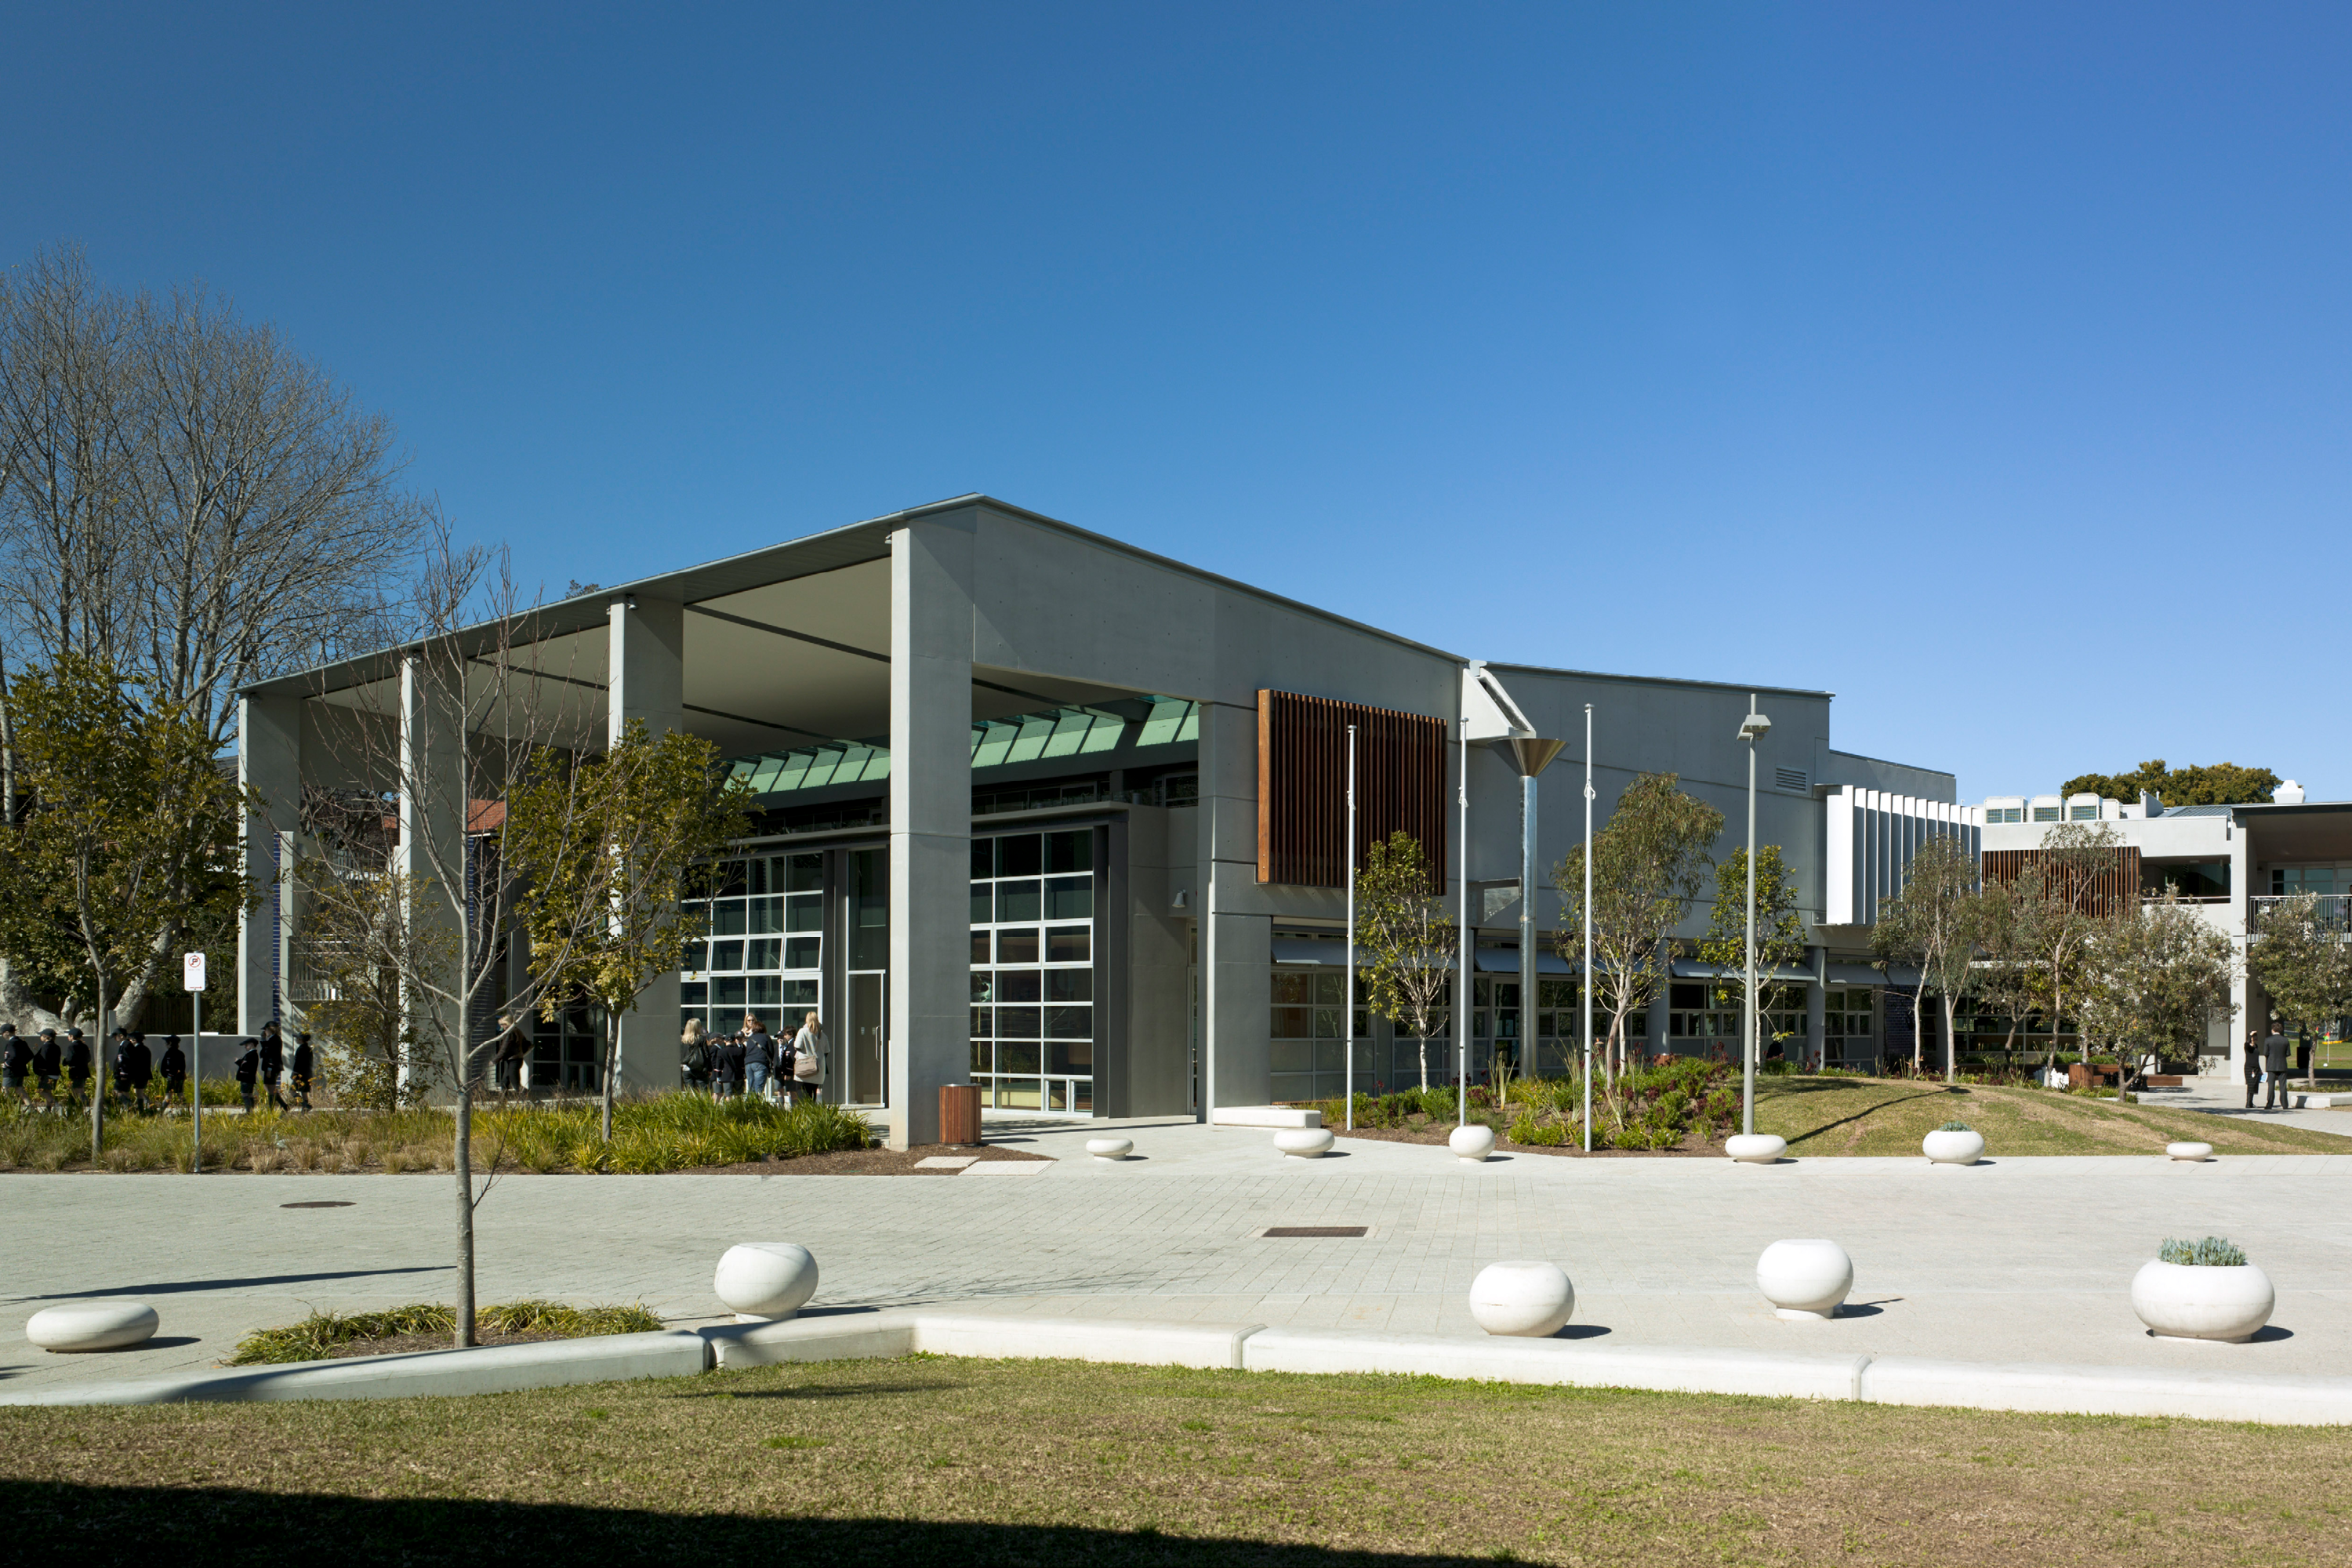 Photograph of exteriors of the award-wining Cranbrook Junior School designed by Tzannes